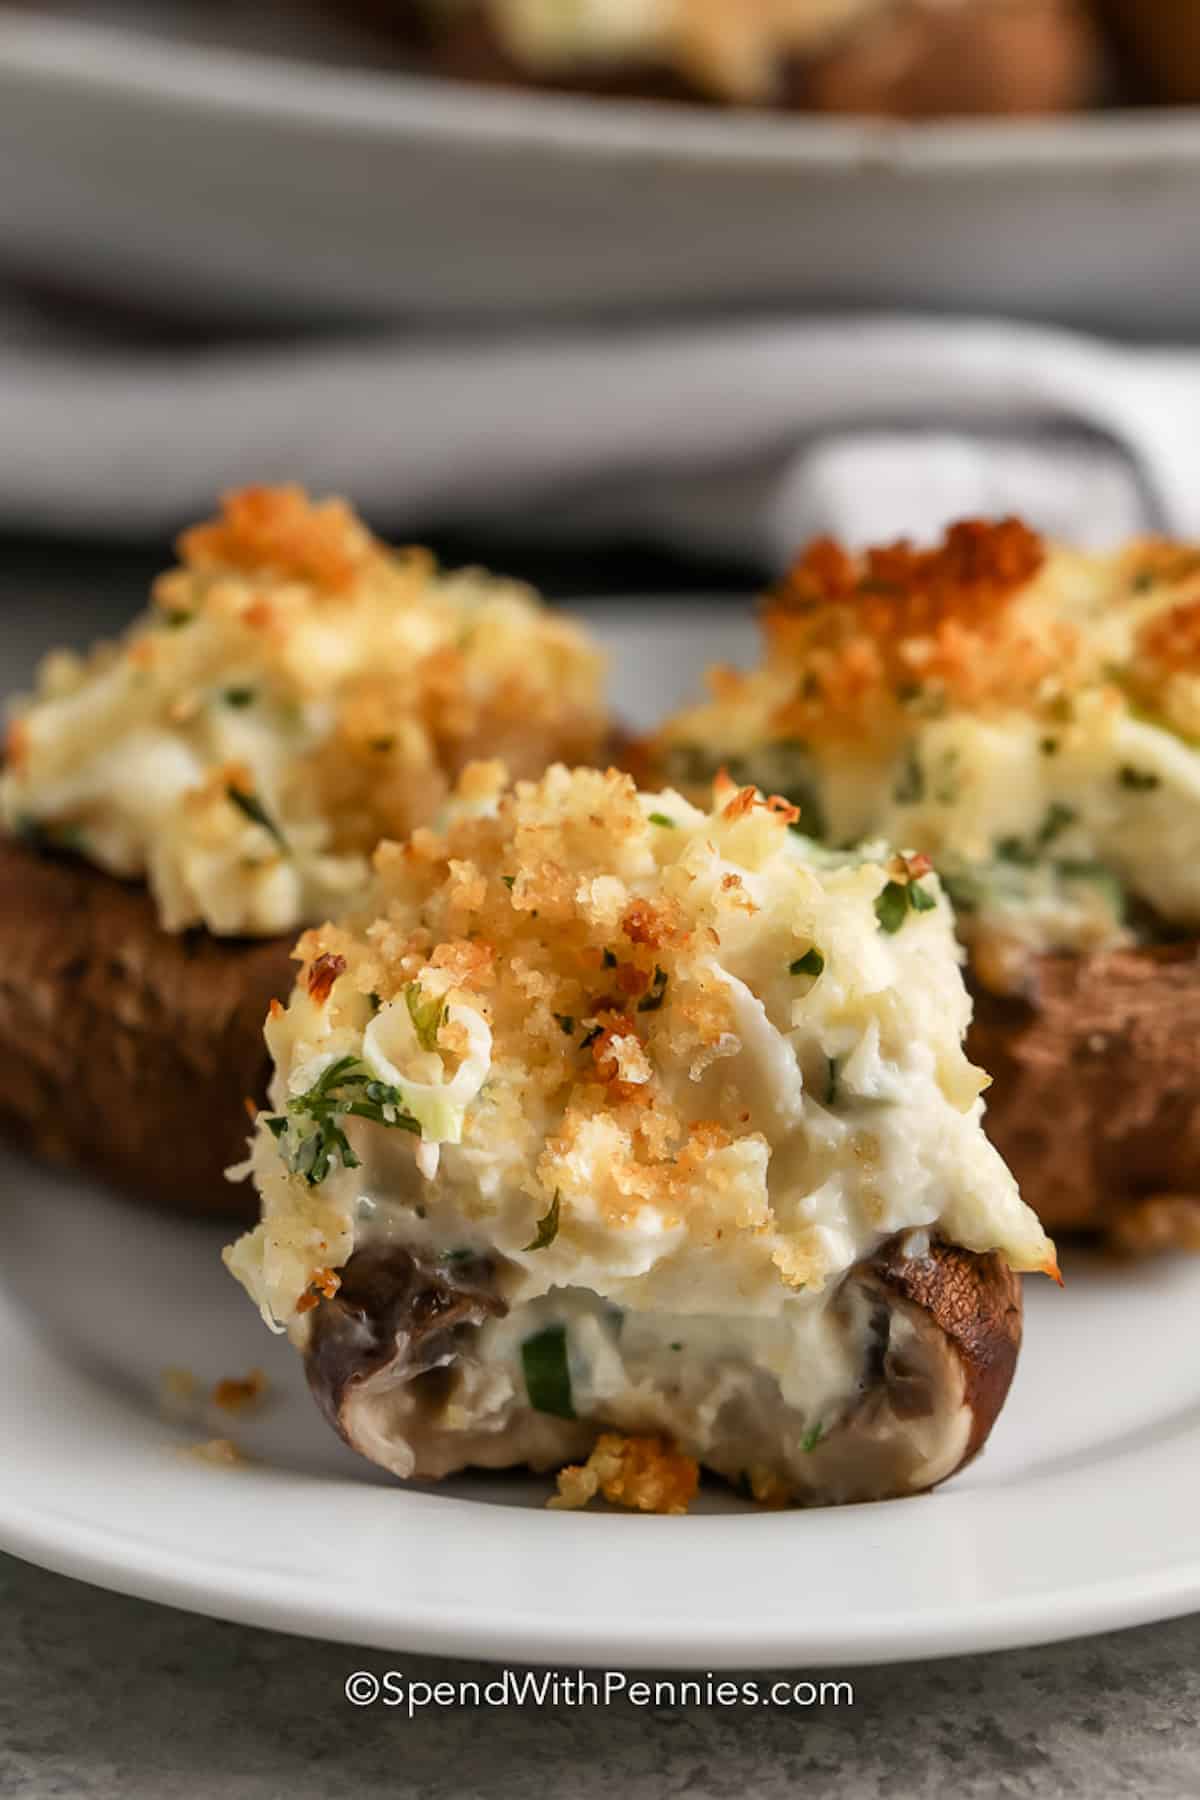 Stuffed mushrooms with parmesan cheese and parsley, served on a white plate.